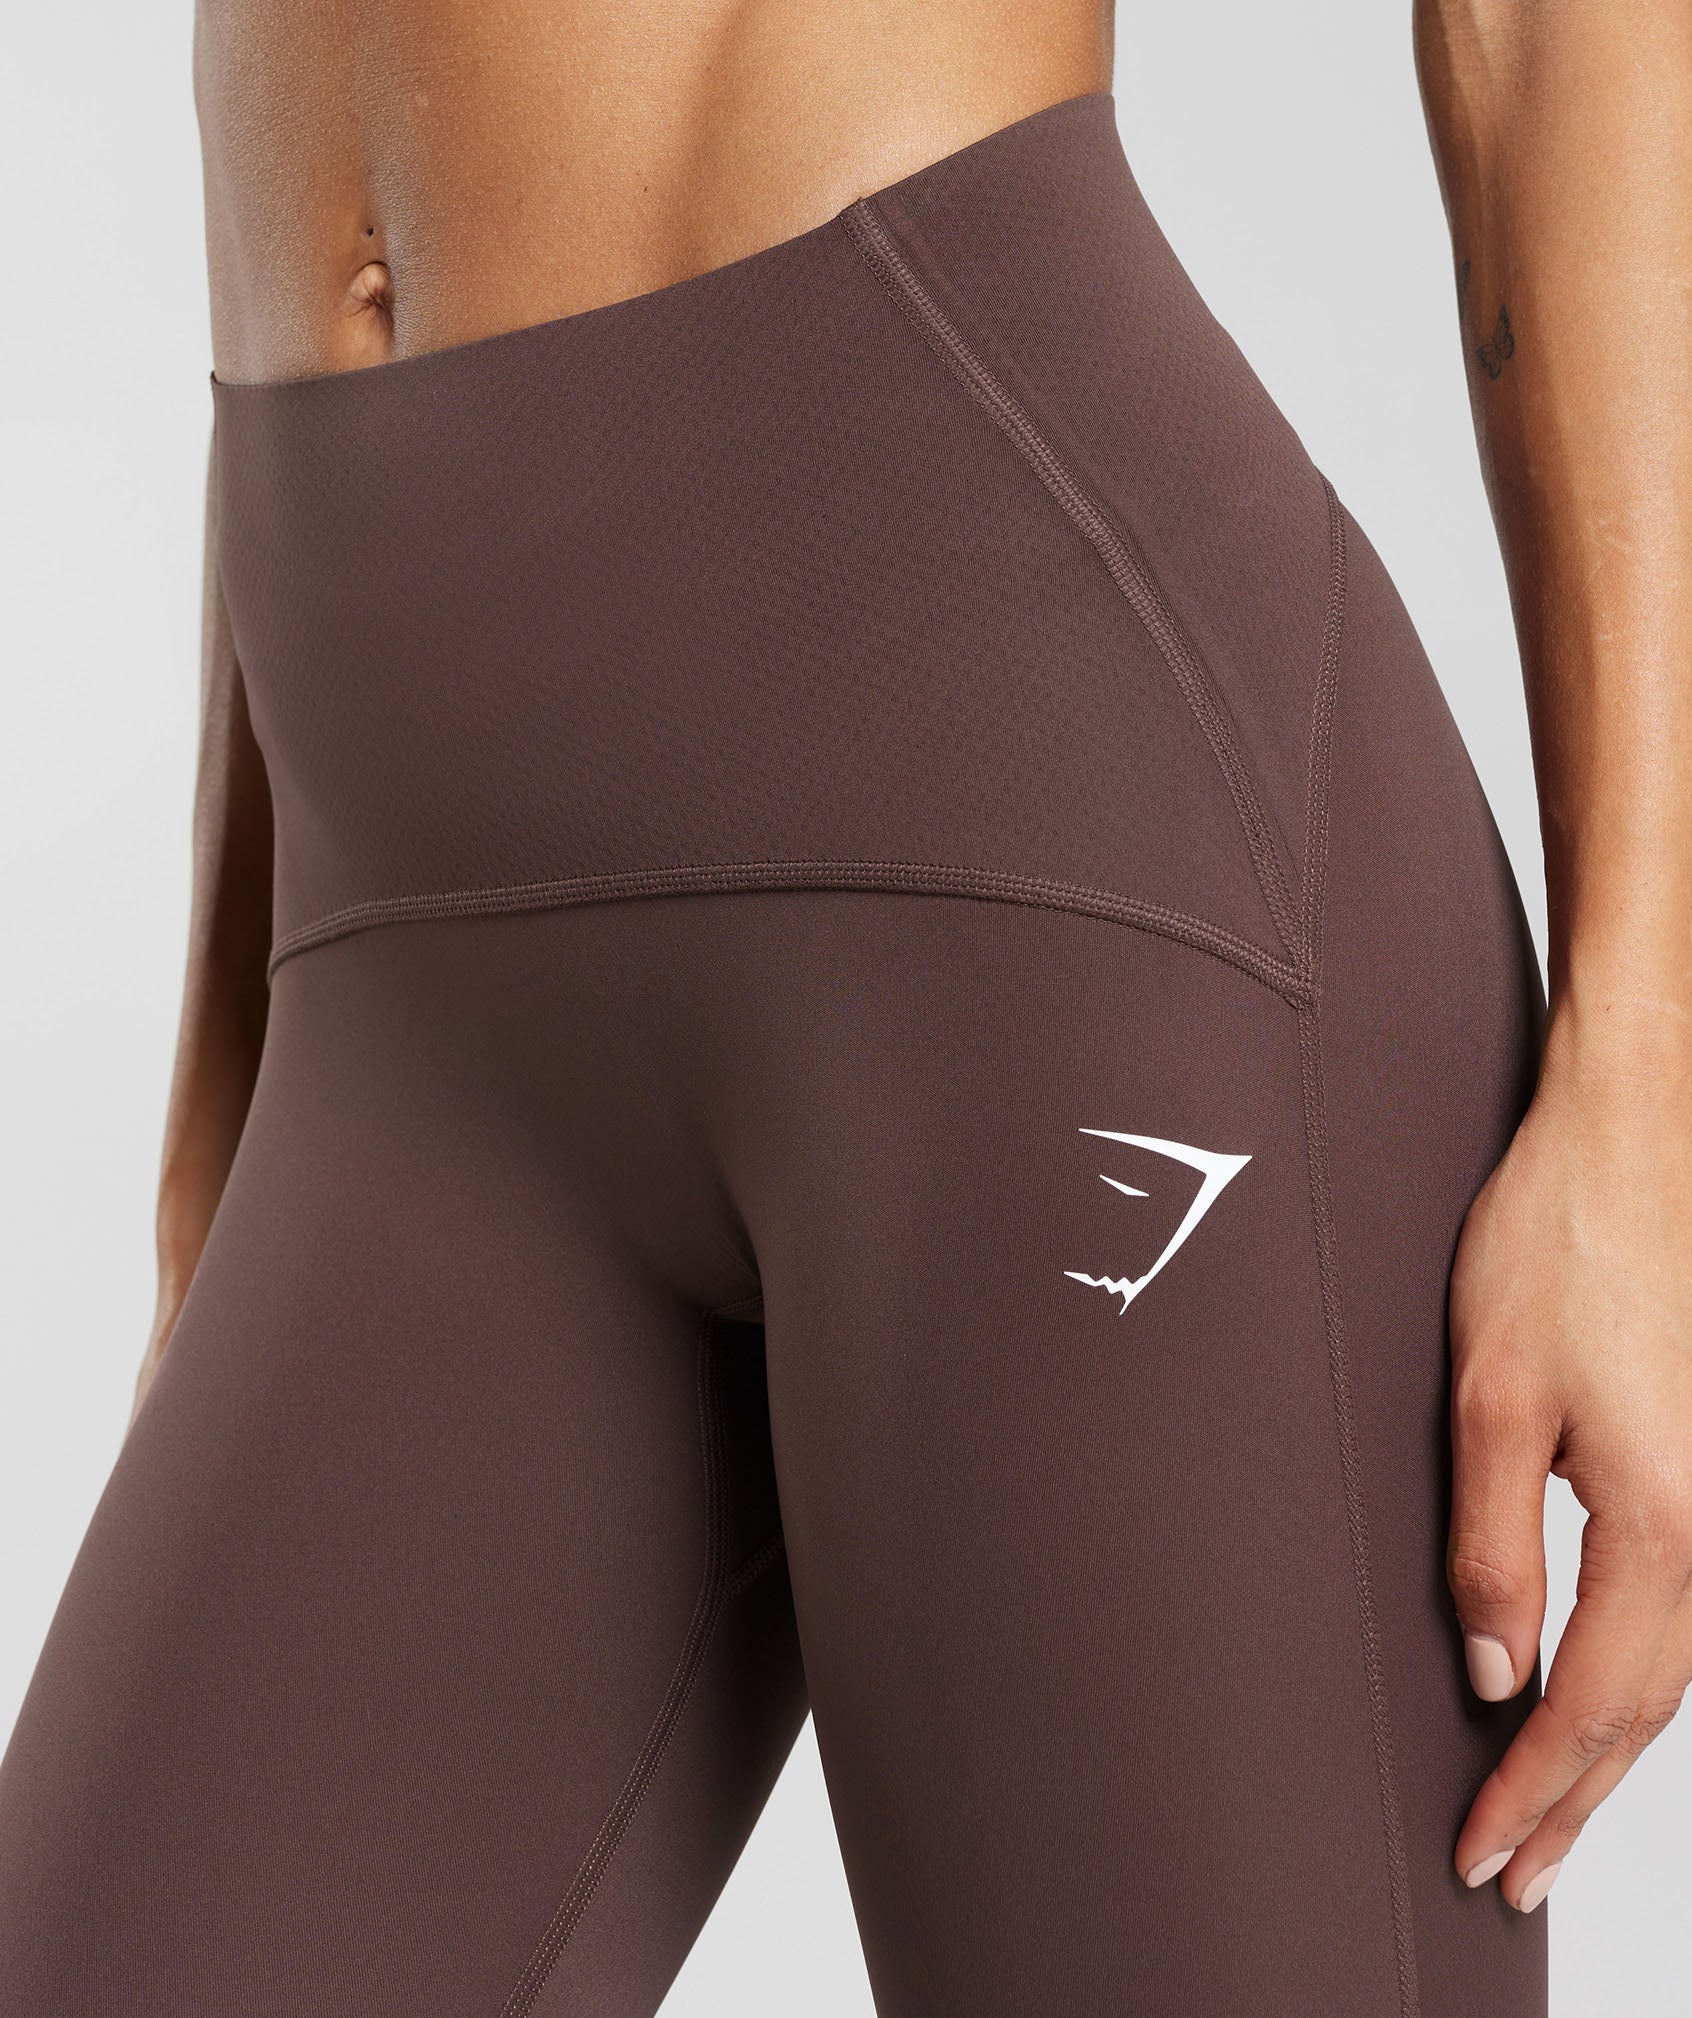 Waist Support Leggings in Chocolate Brown